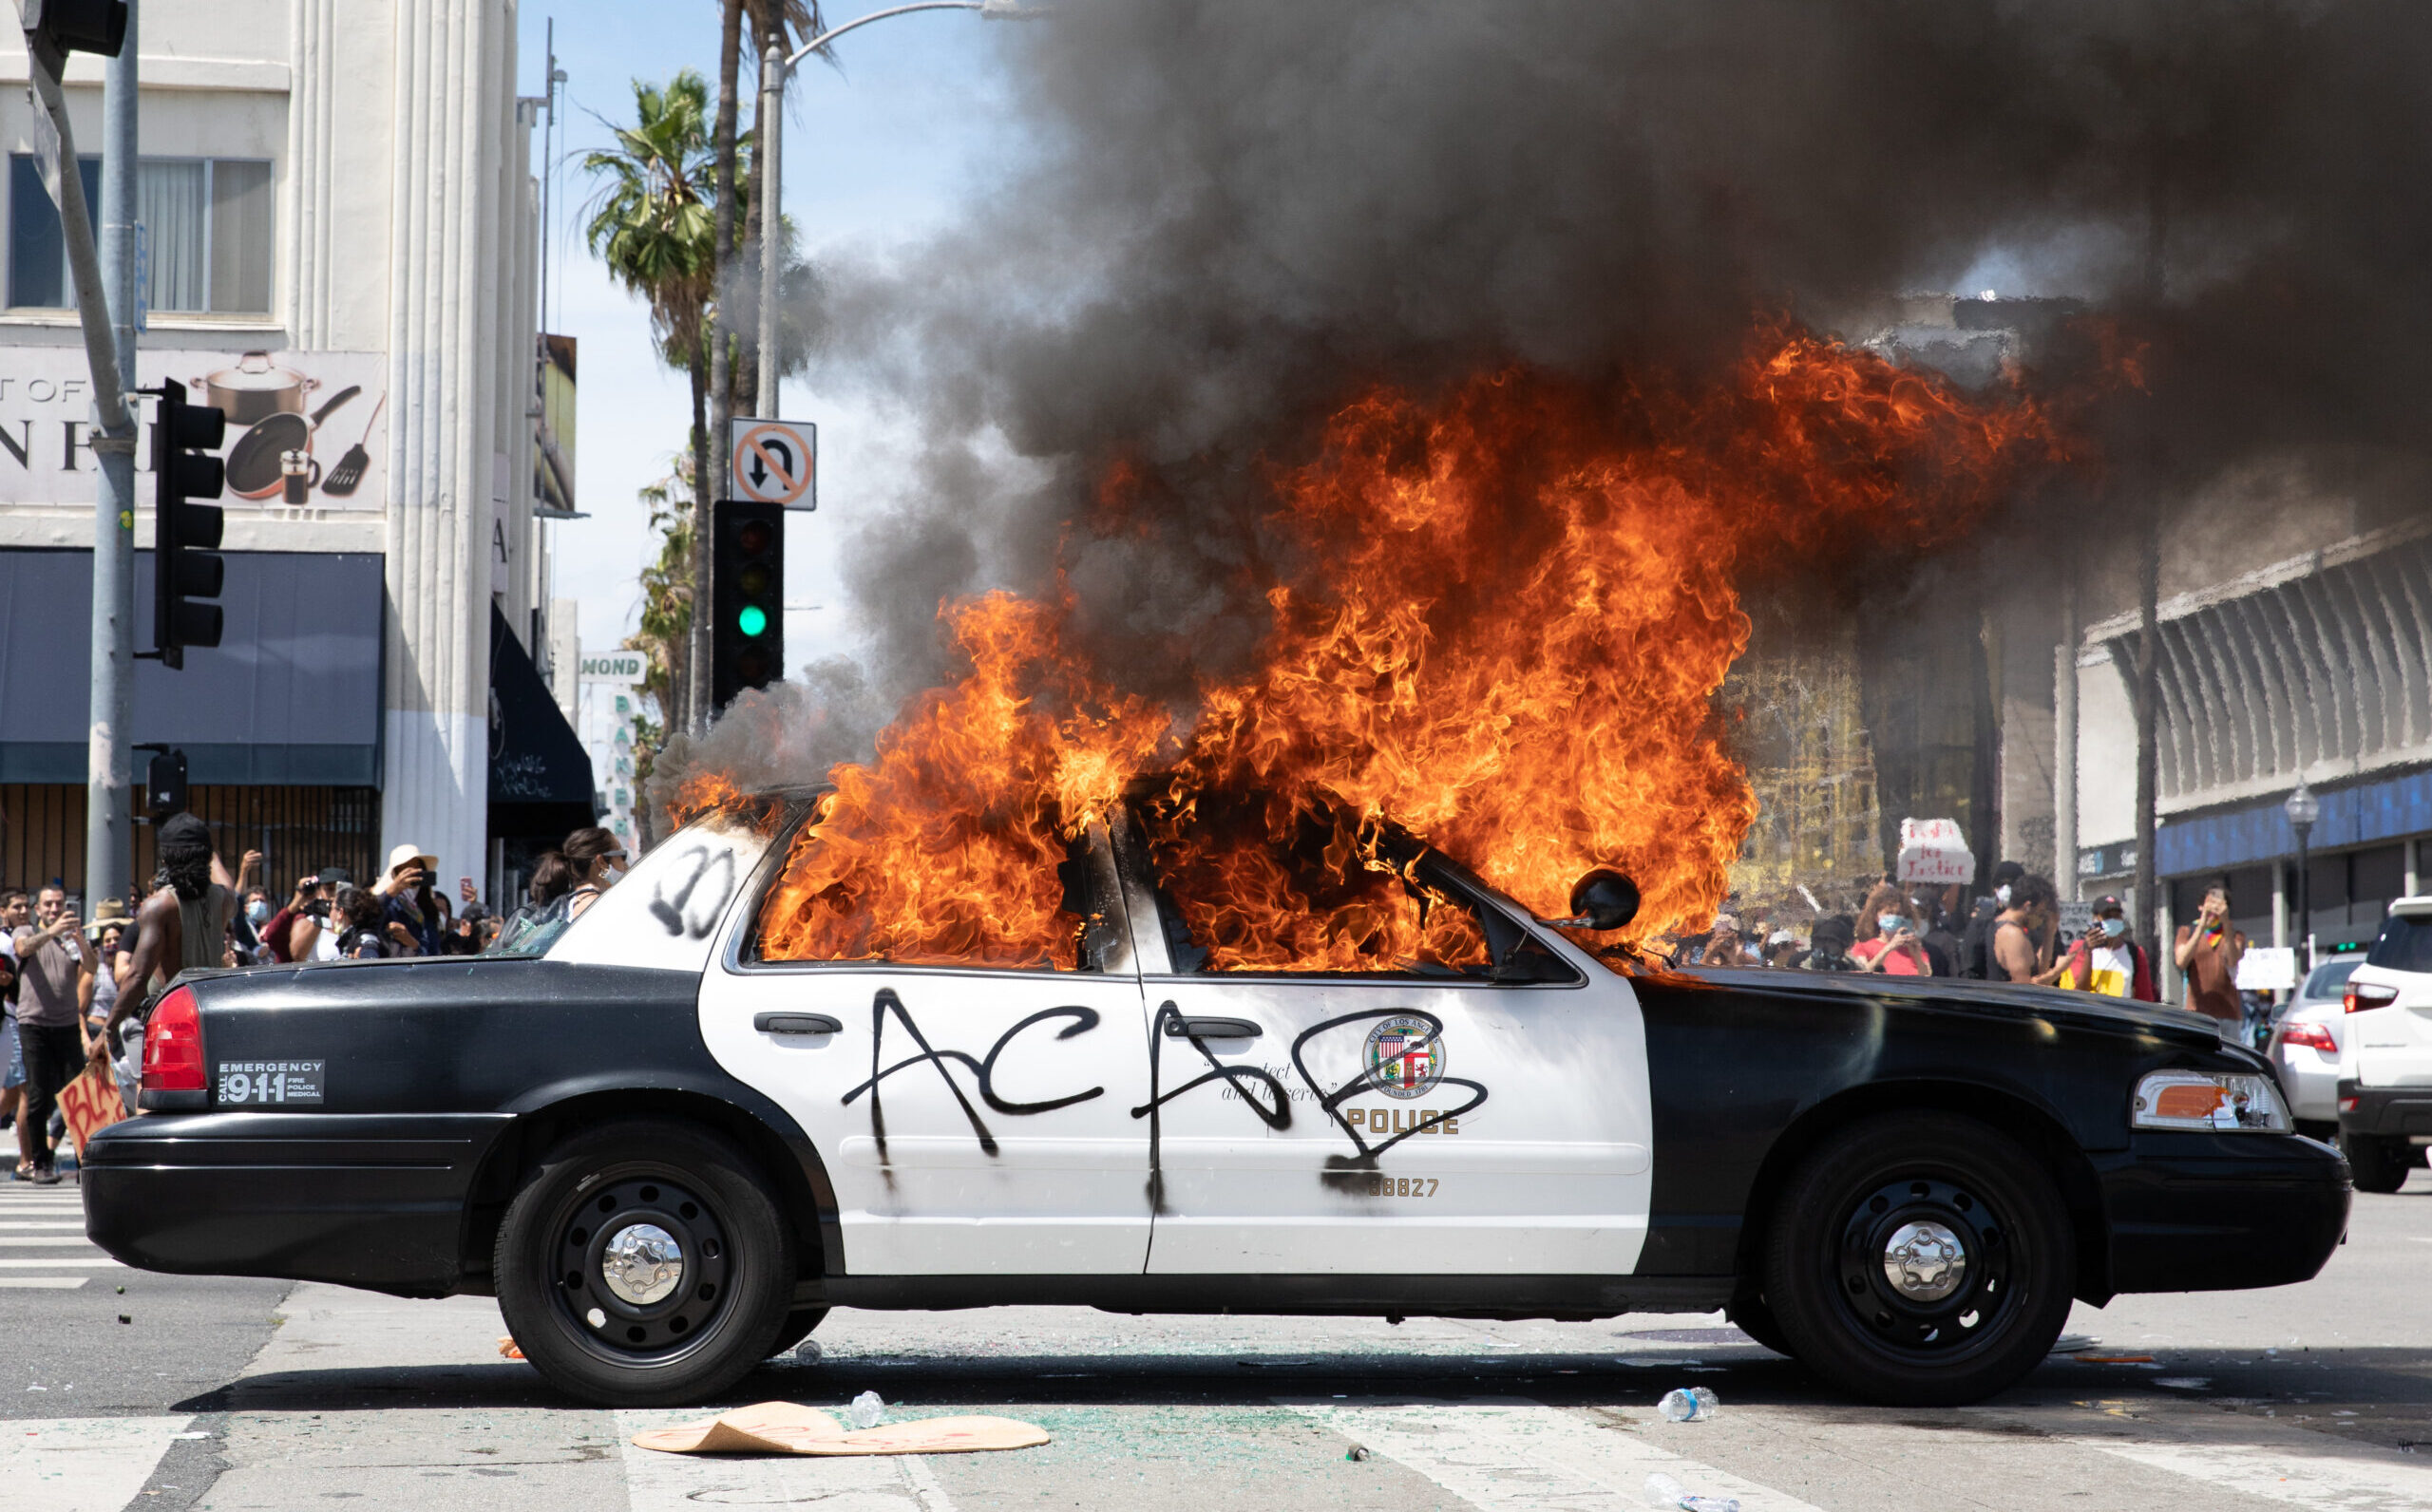 Los,Angeles,-,May,30,,2020:,Police,Car,Being,Burned